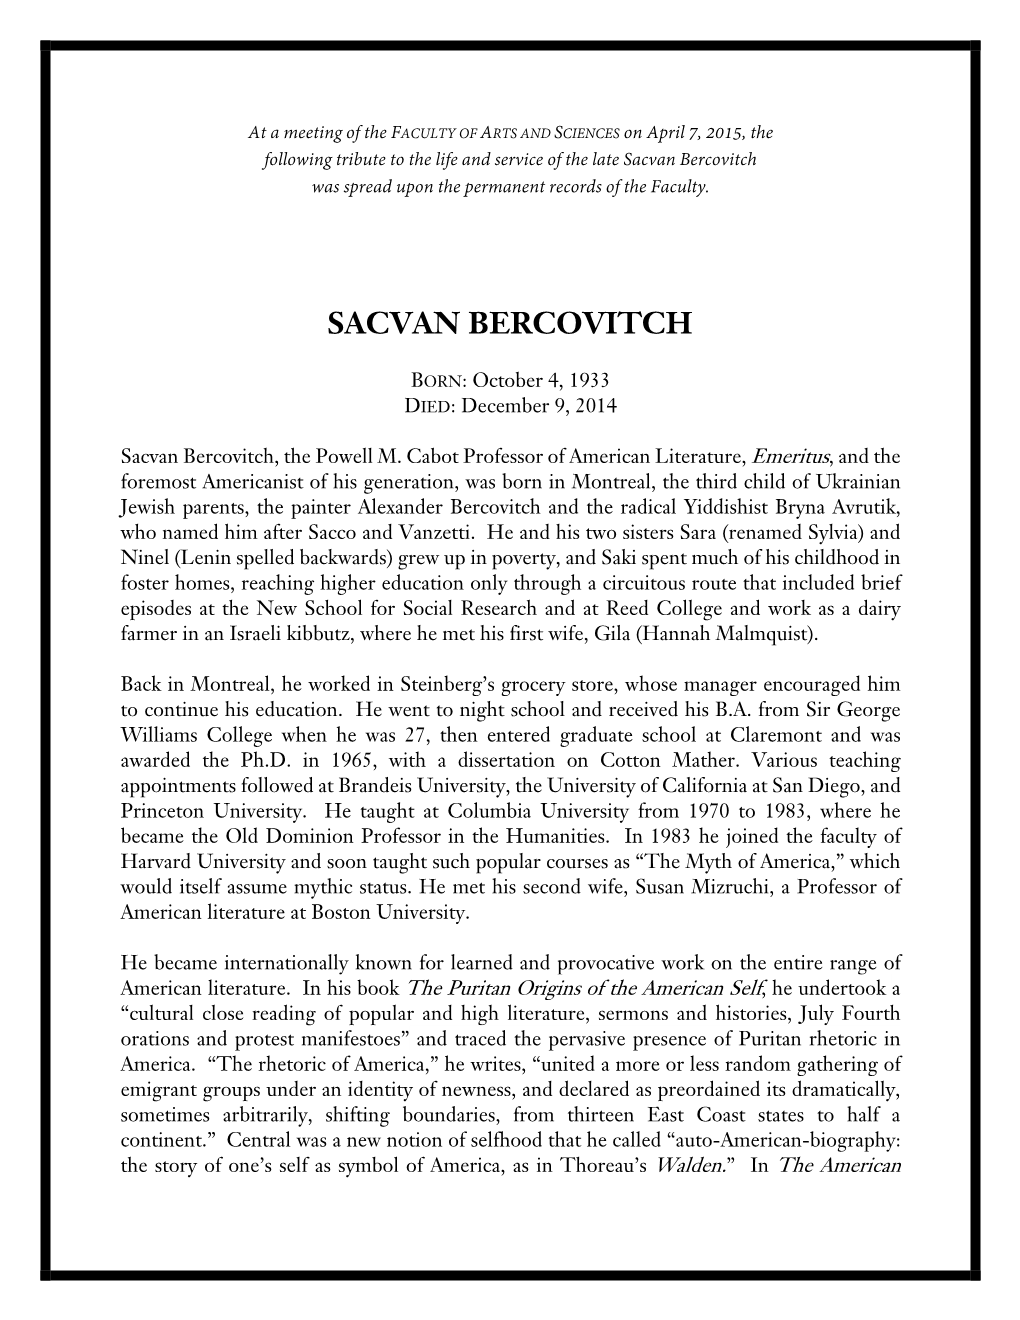 Sacvan Bercovitch Was Spread Upon the Permanent Records of the Faculty